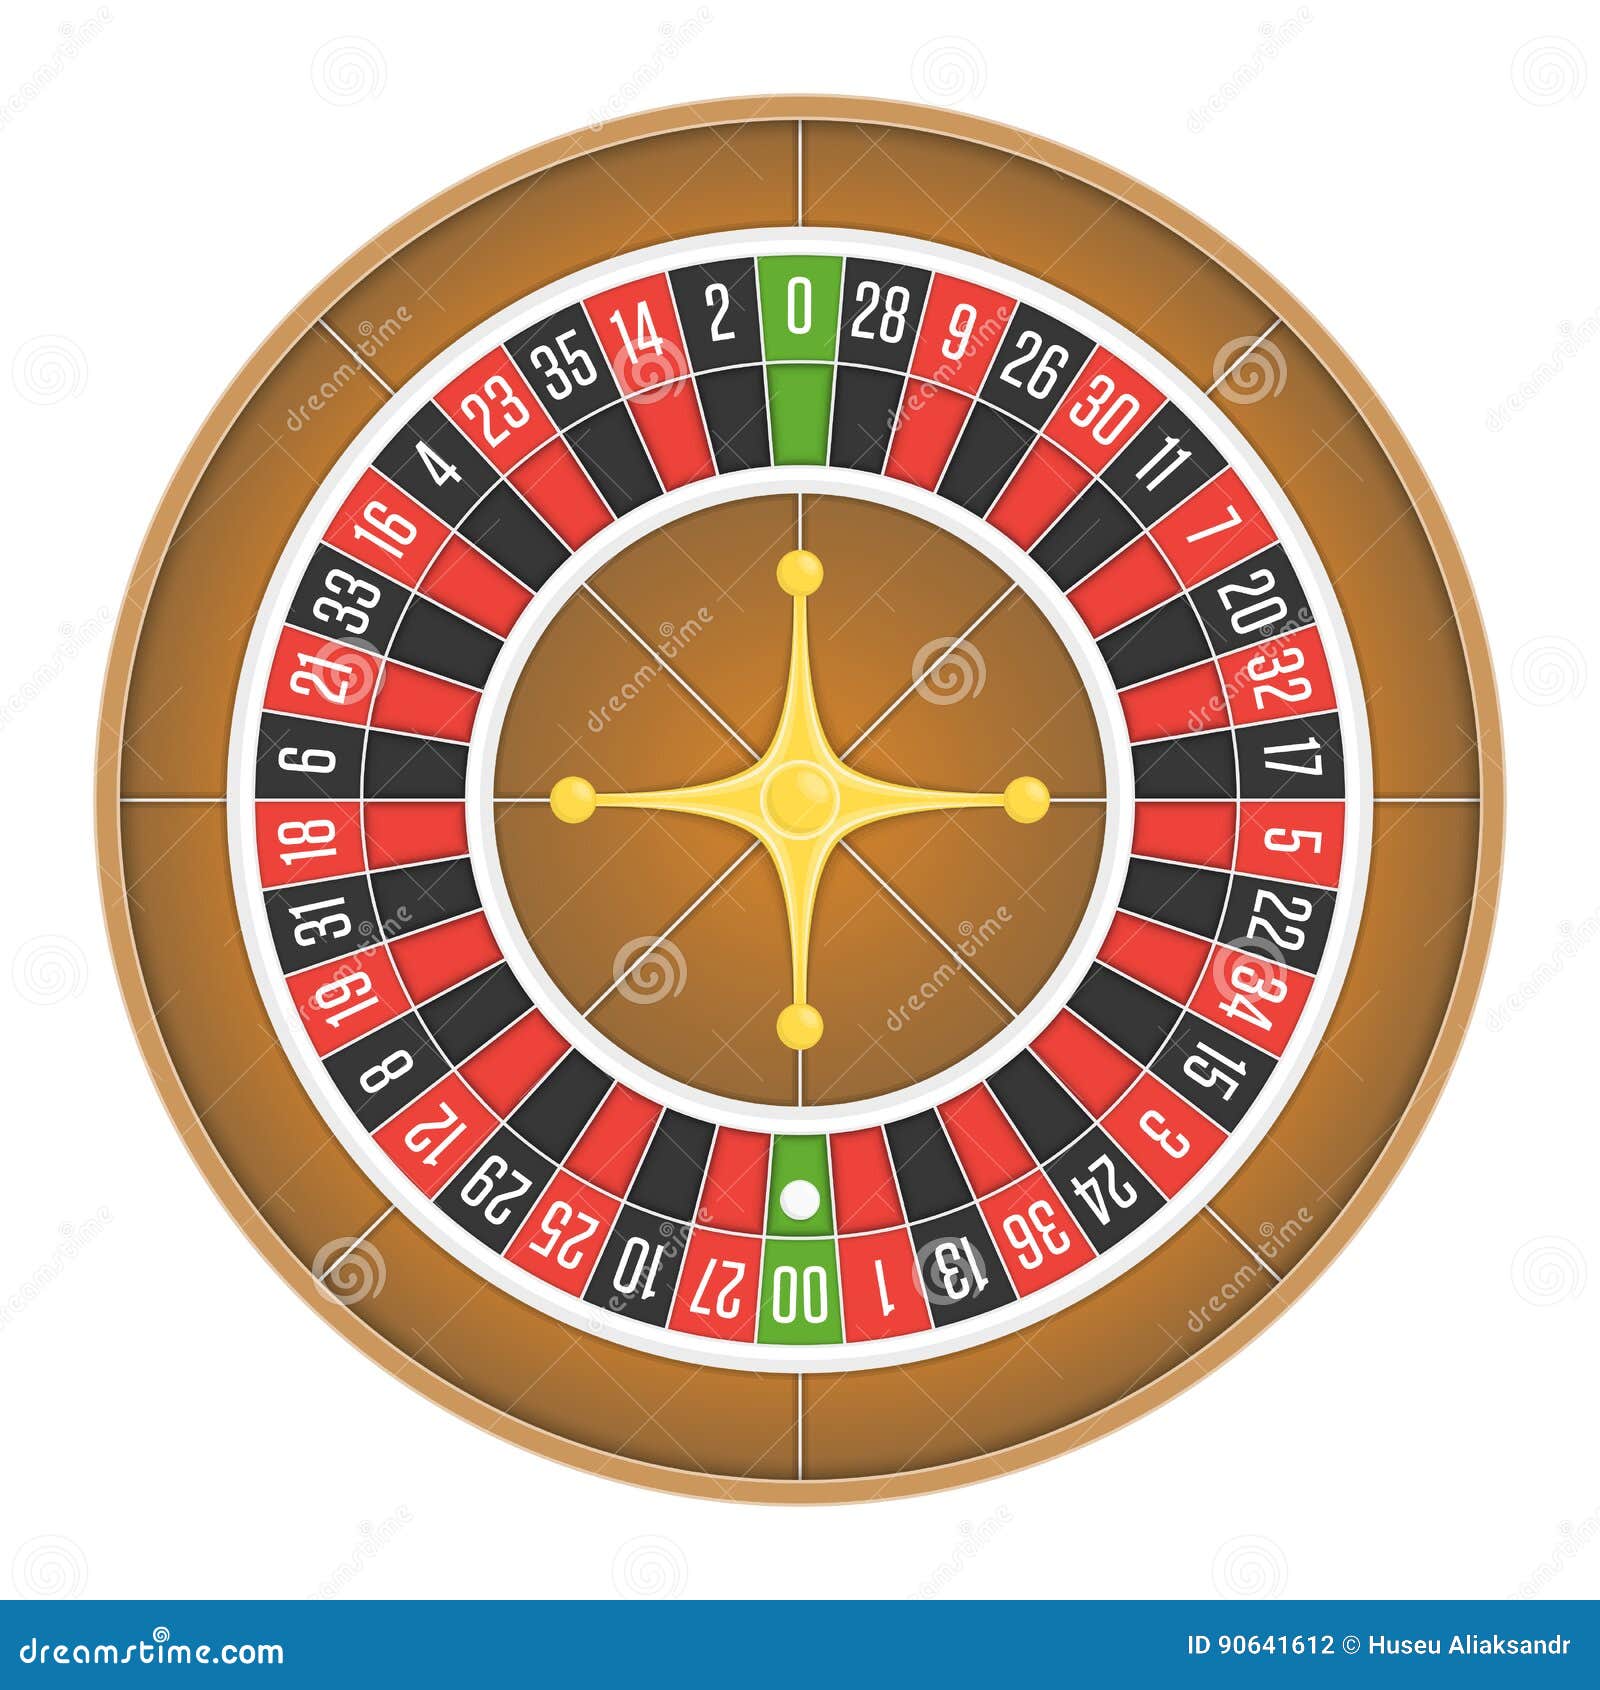 How I Got Started With casino roulette